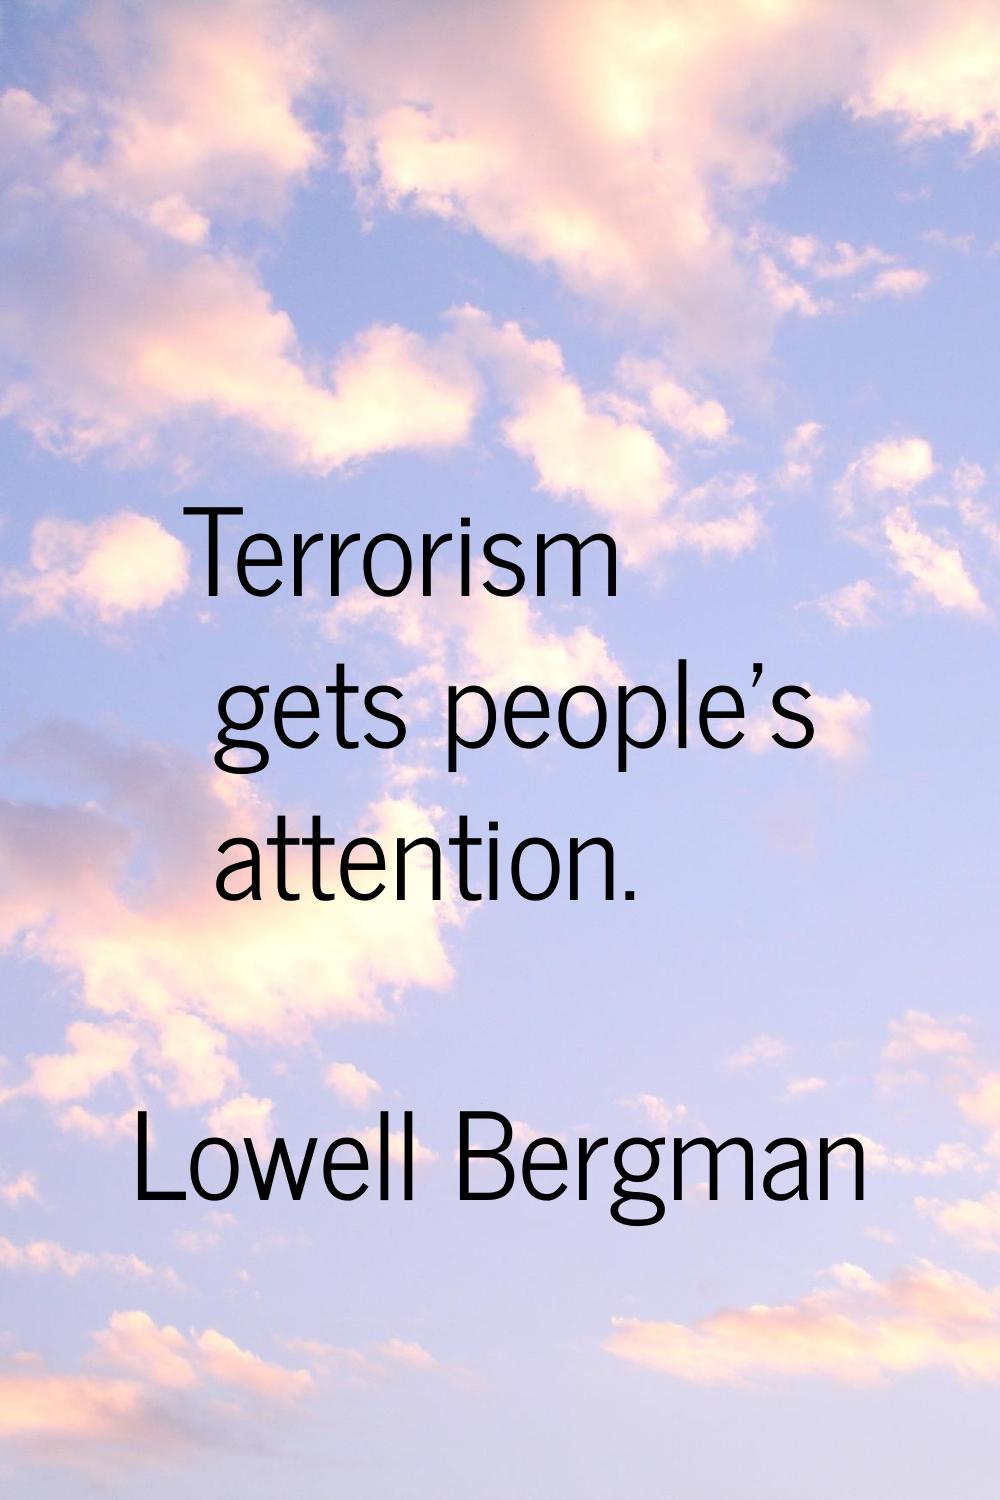 Terrorism gets people's attention.